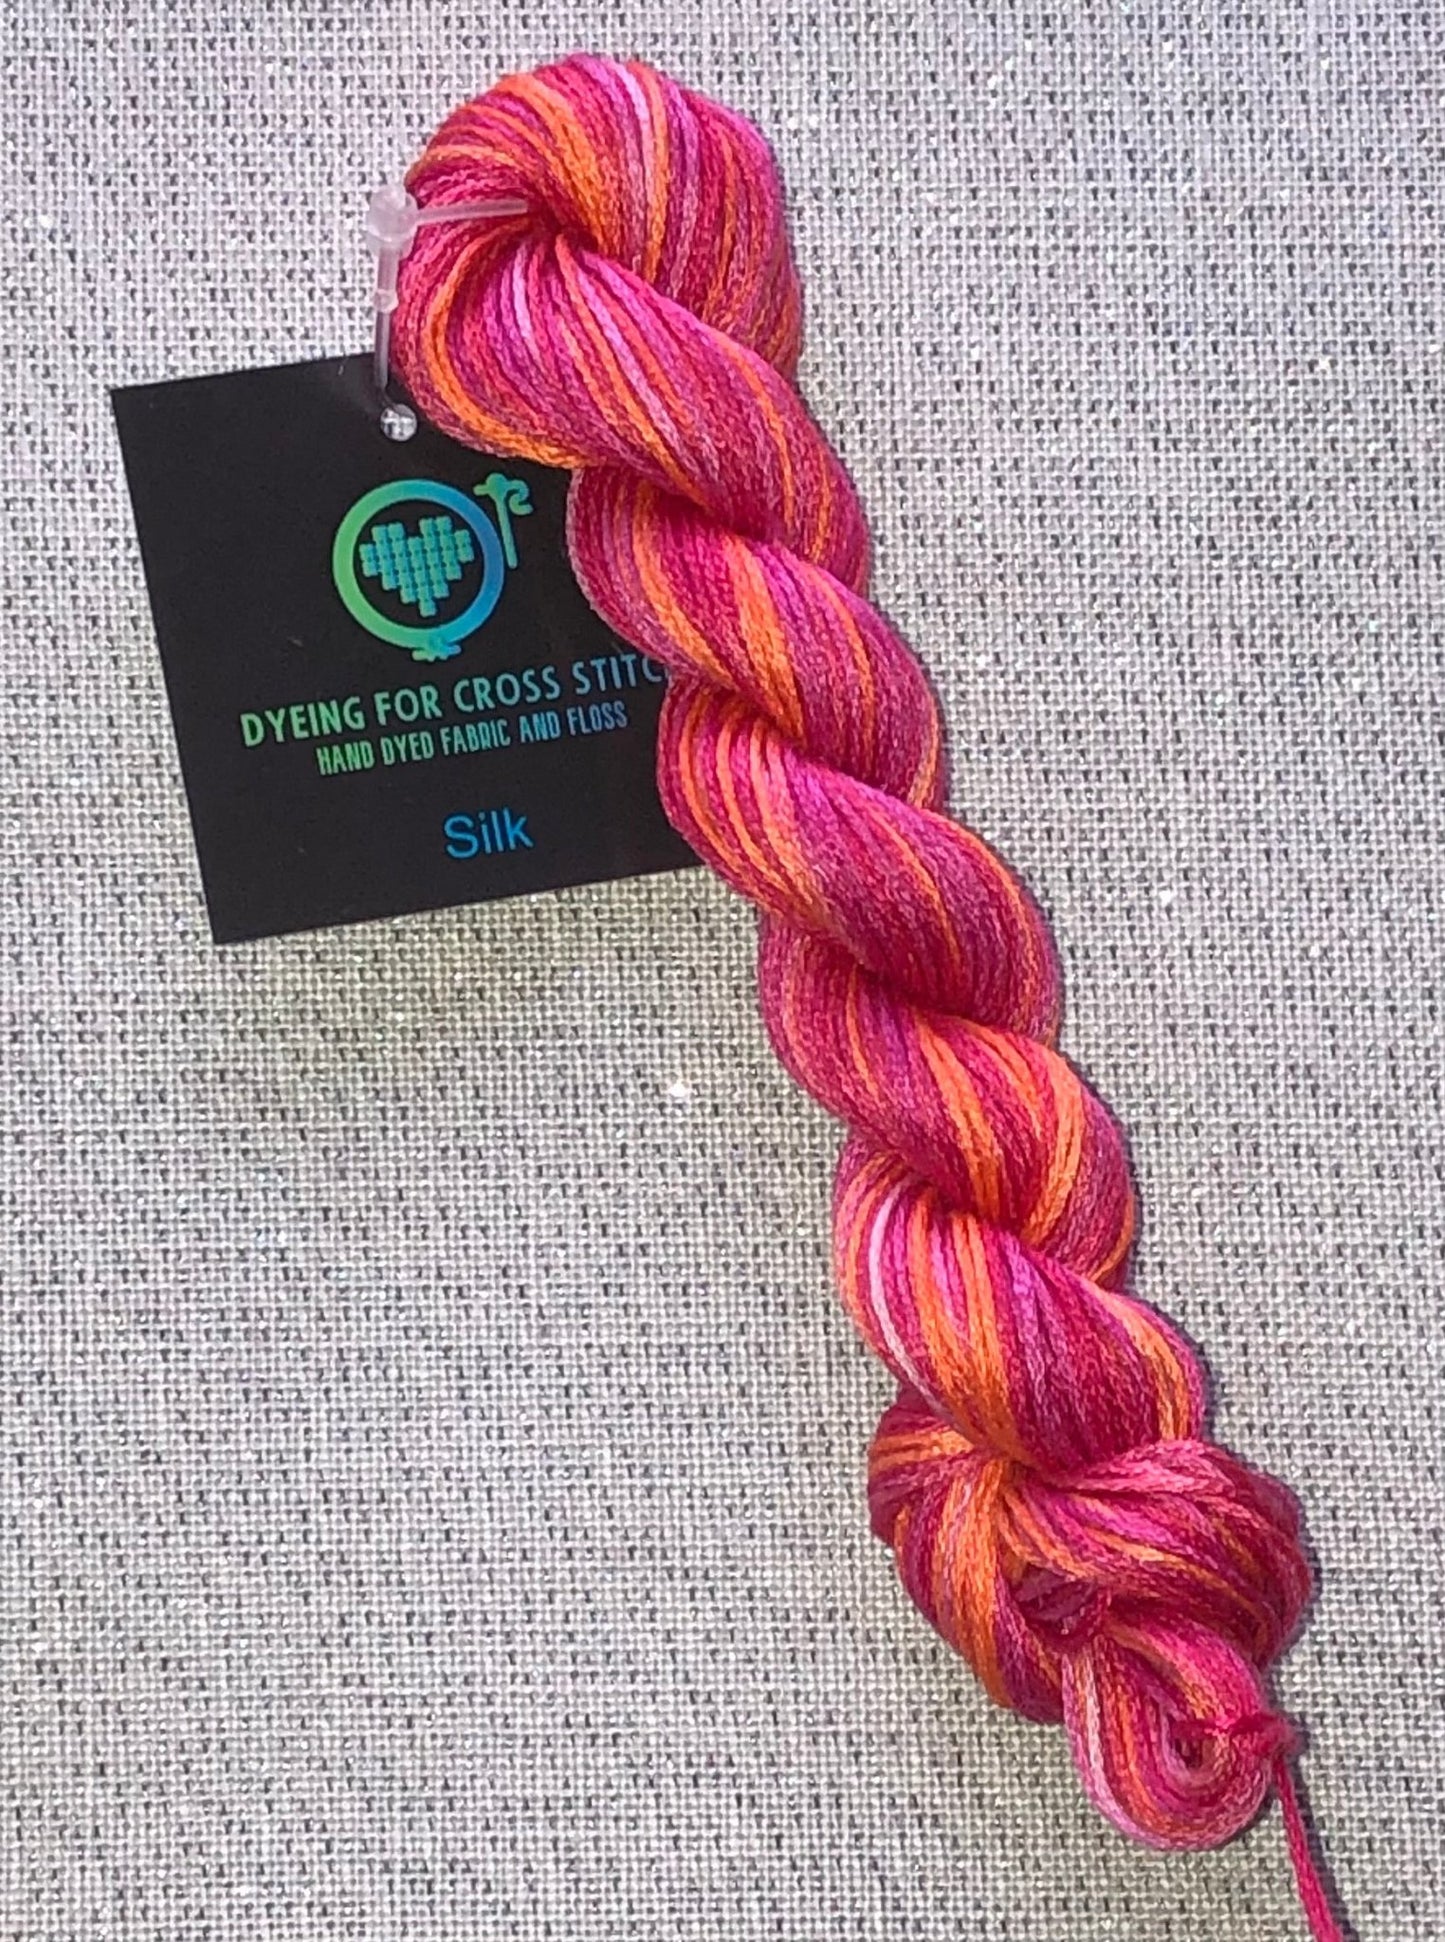 Silk hand dyed floss - Gerber - Dyeing for Cross Stitch